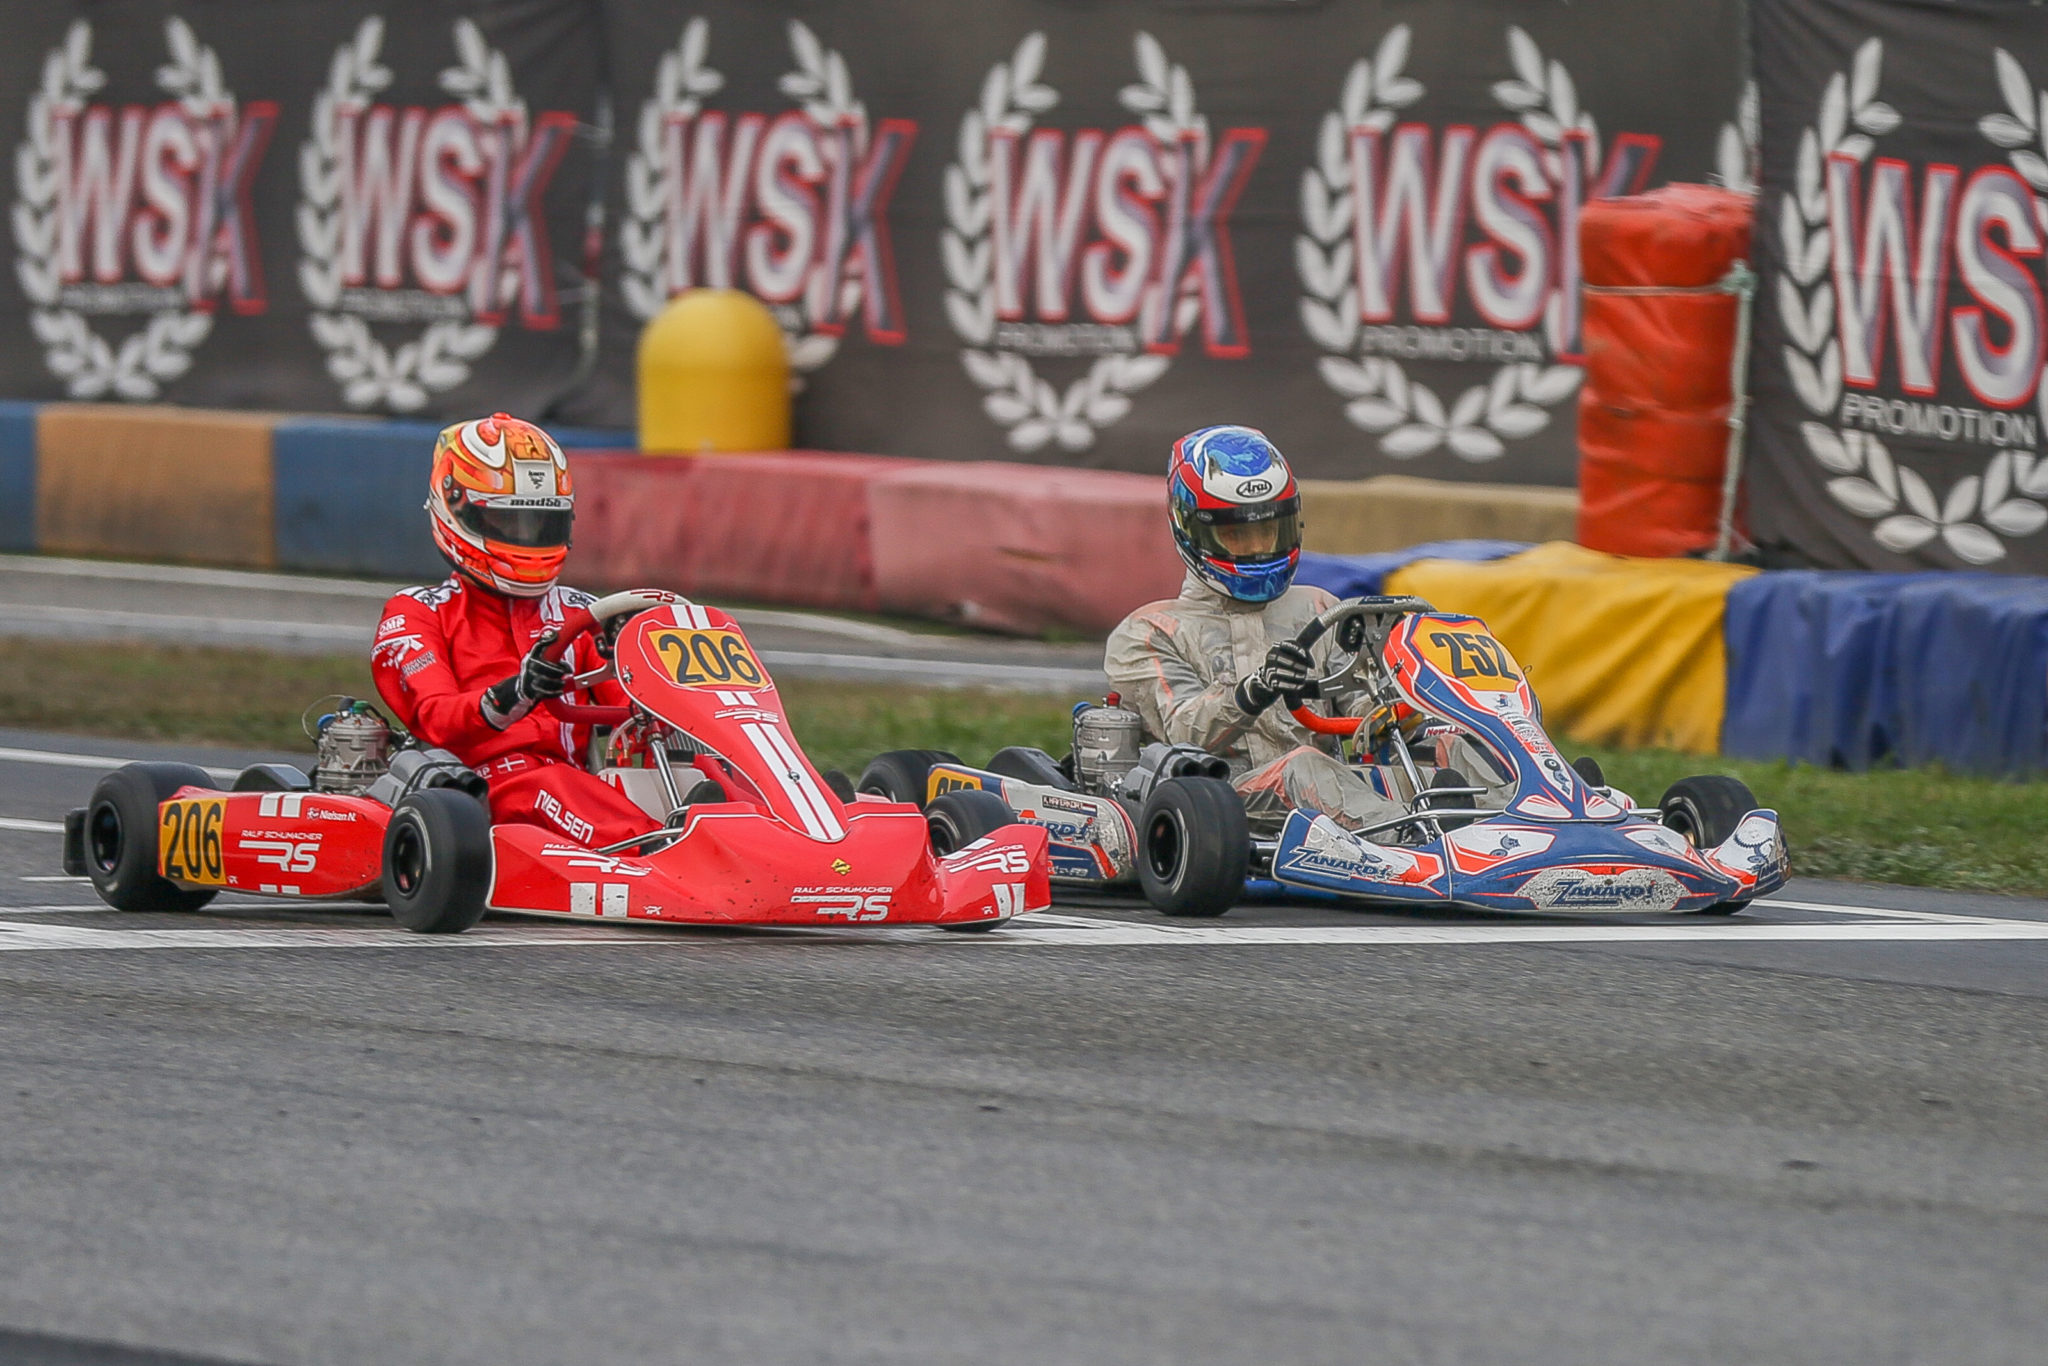 WSK Final Cup – Round 2: Friday Recap